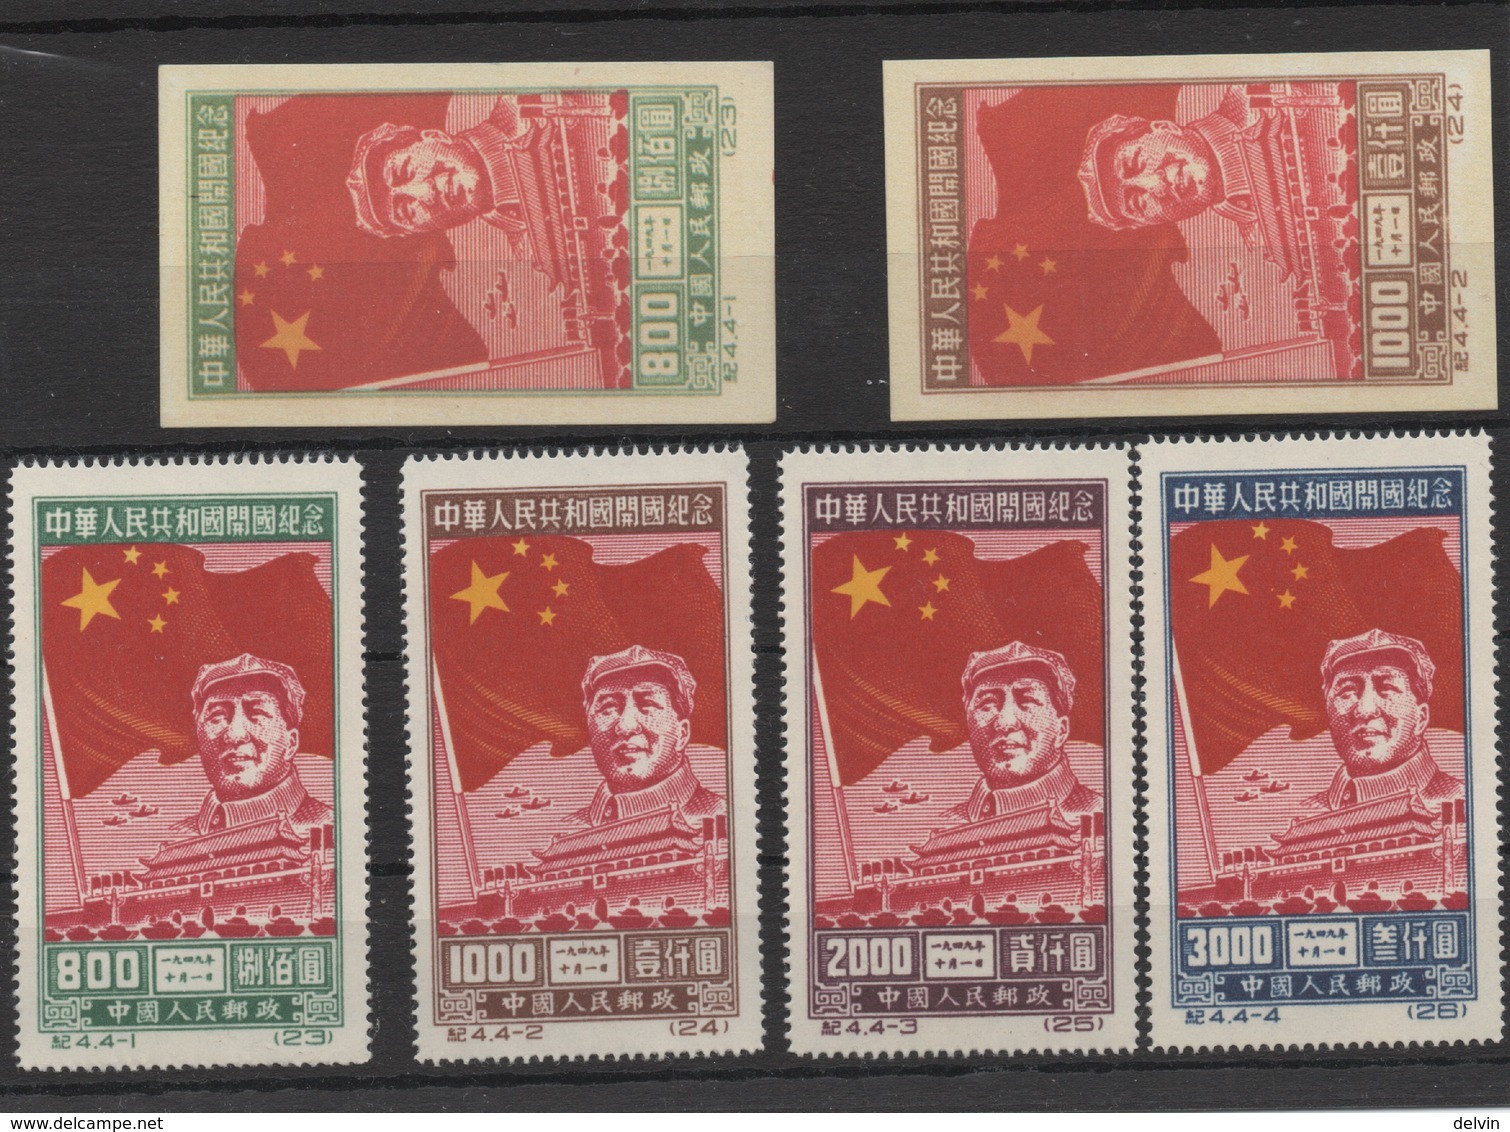 China 1950-Mao Tze Tung And Flag -4 Complete Sets Of 24 Stamps Perf.& Imperf. Reprint Of The Era. New No Gum (see Photo) - Officiële Herdrukken